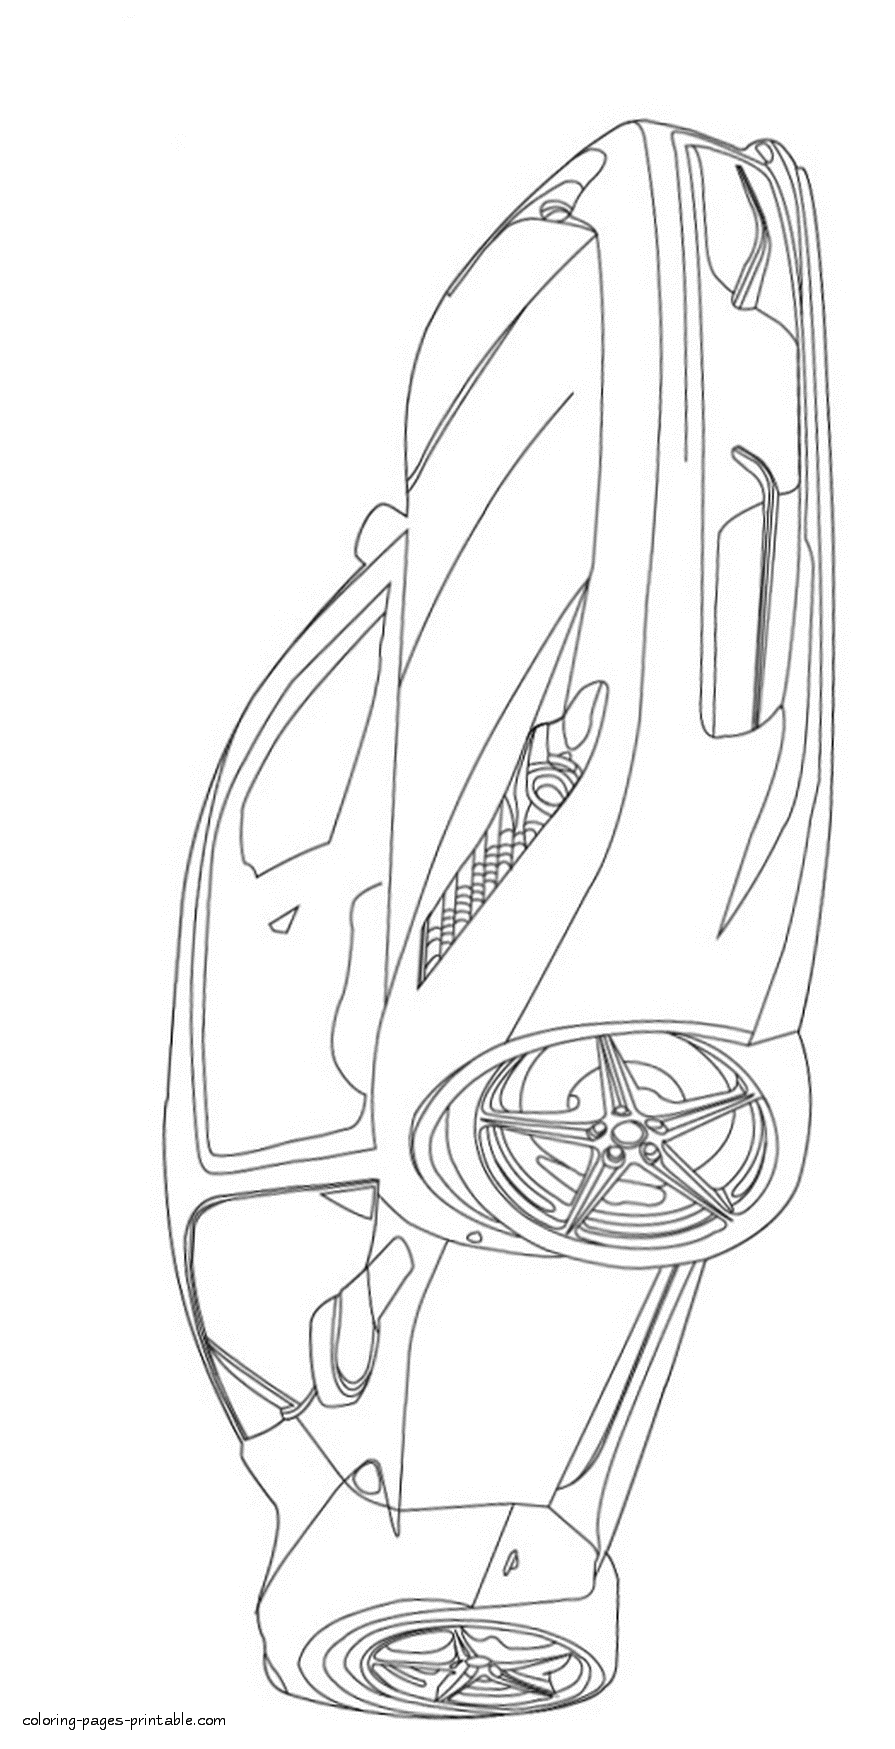 Coloring pages for boys. Ferrari supercar